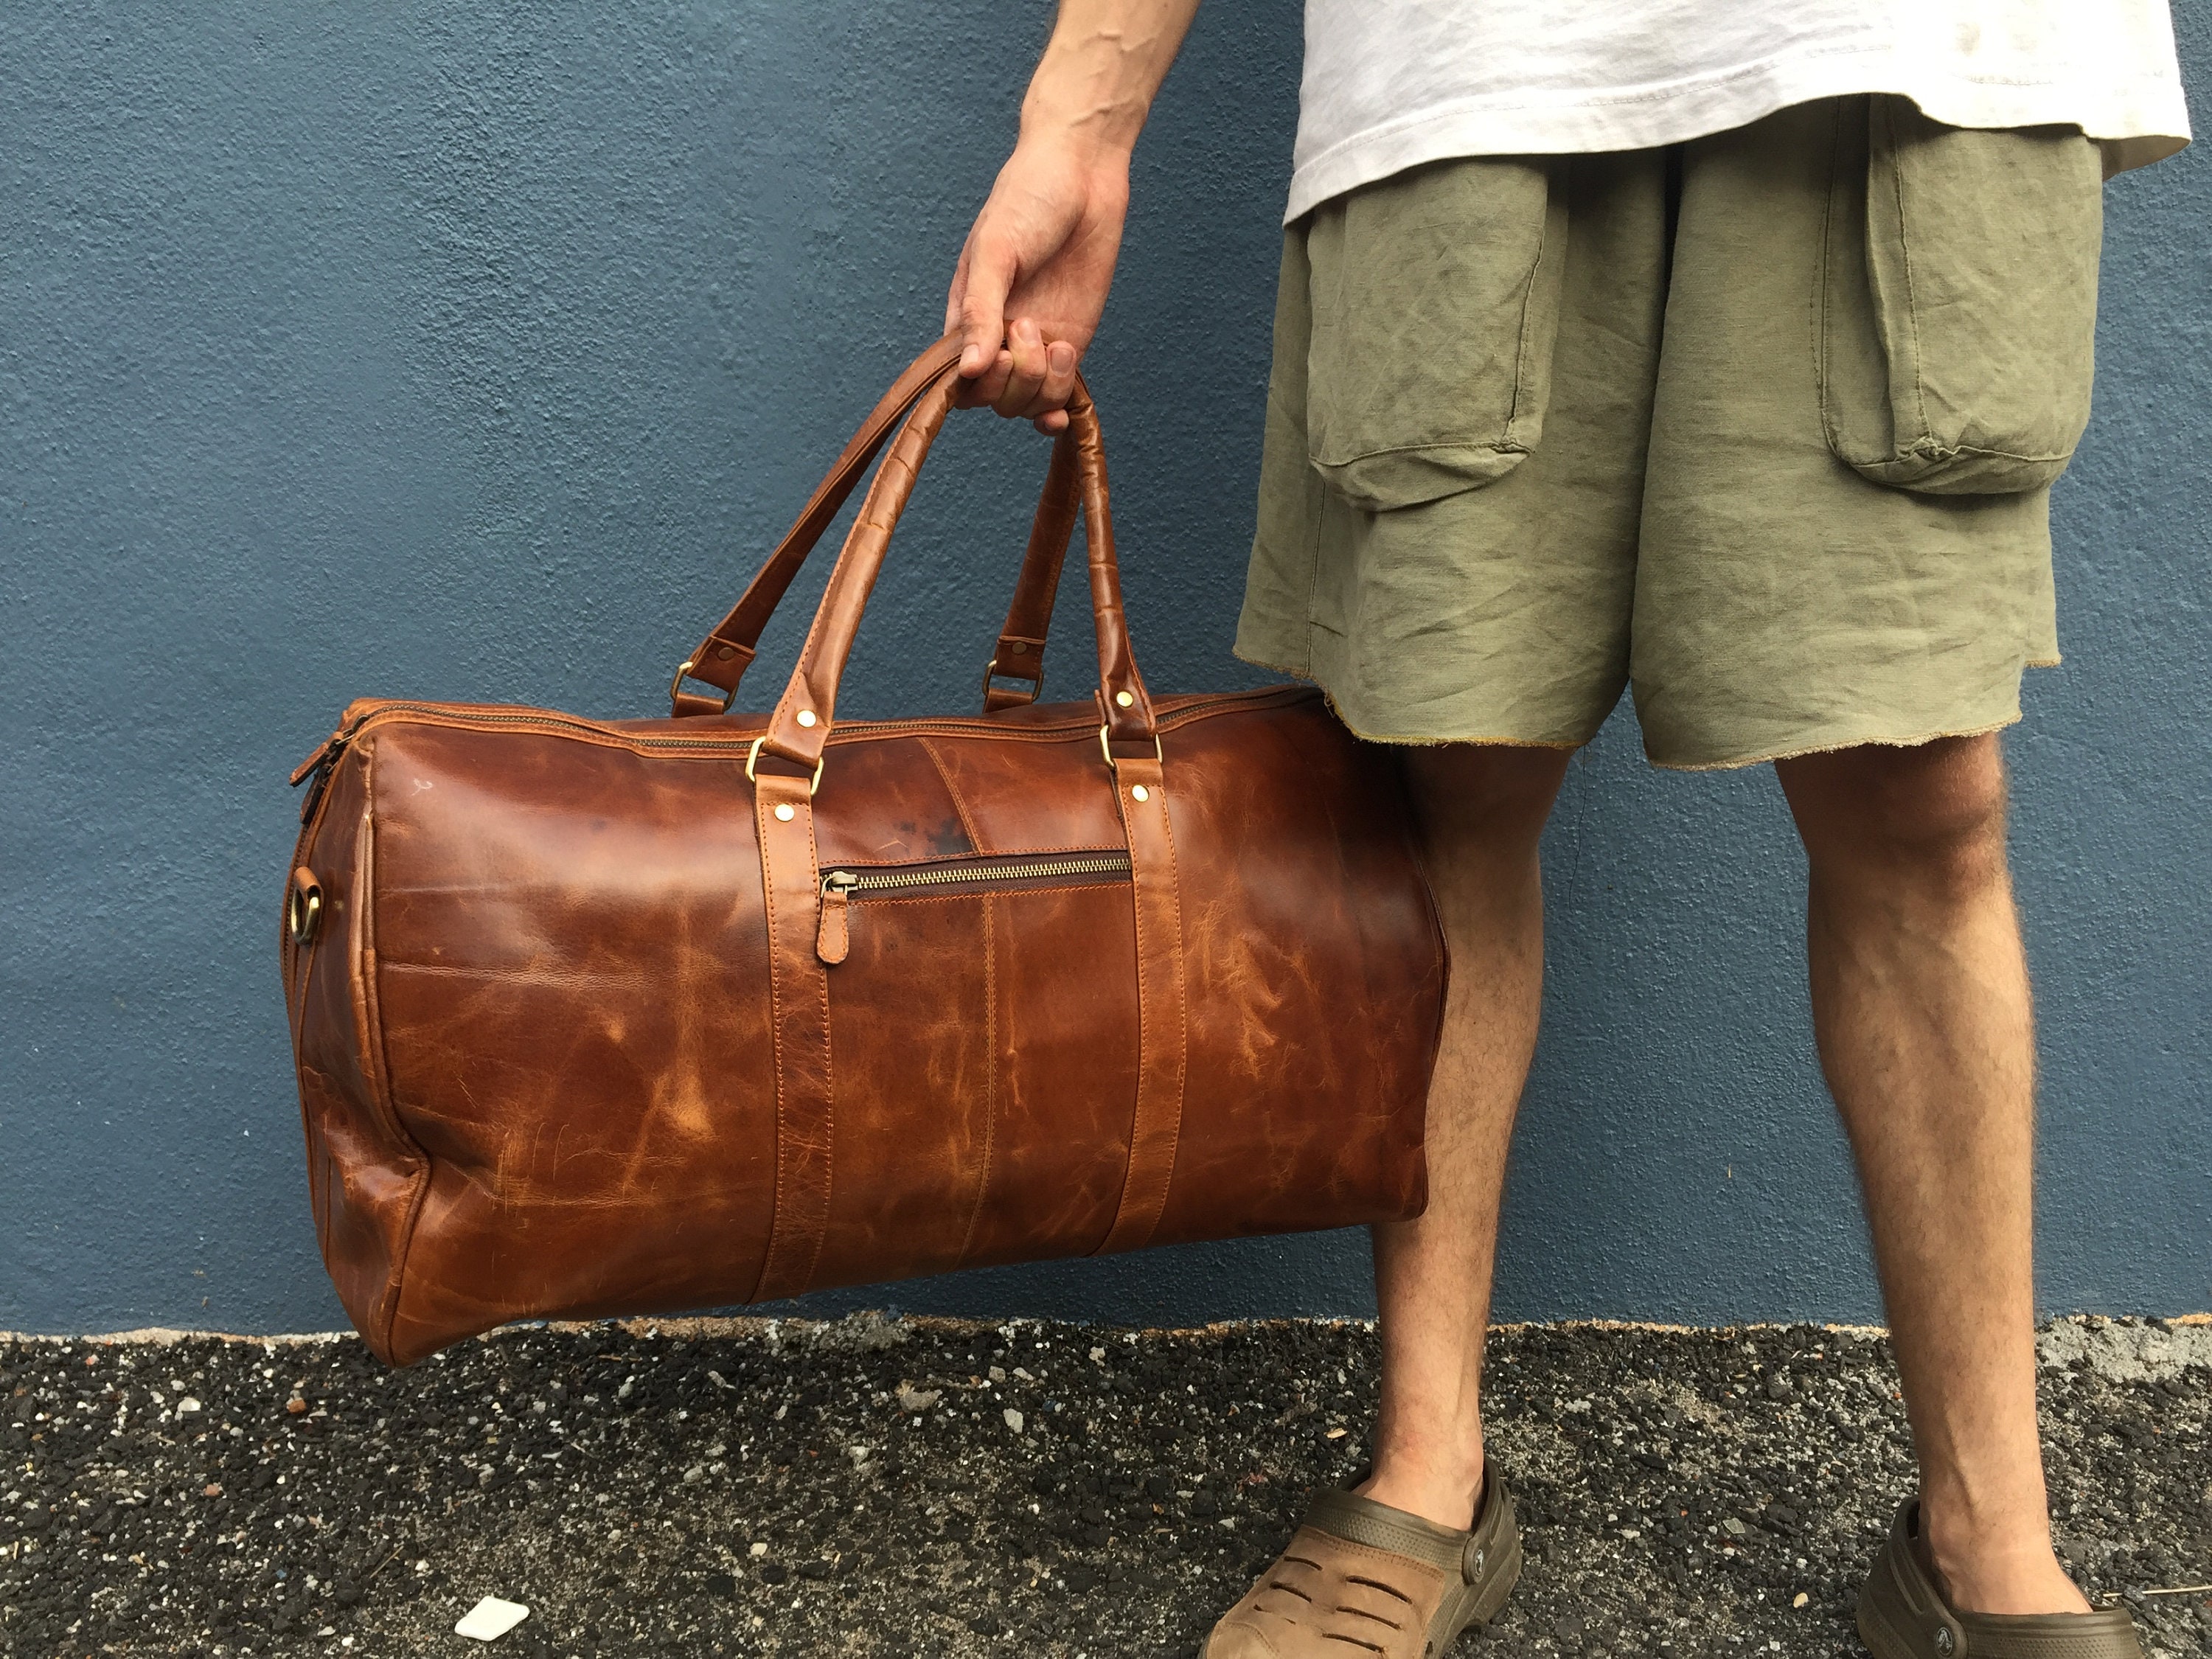 Handmade Duffel Bag / Pure Indian Leather / Made in Kashmir / Travel /  Nomad / Overnight / Daybag / City / Surf / Summer / Spring / Duffle -   Portugal